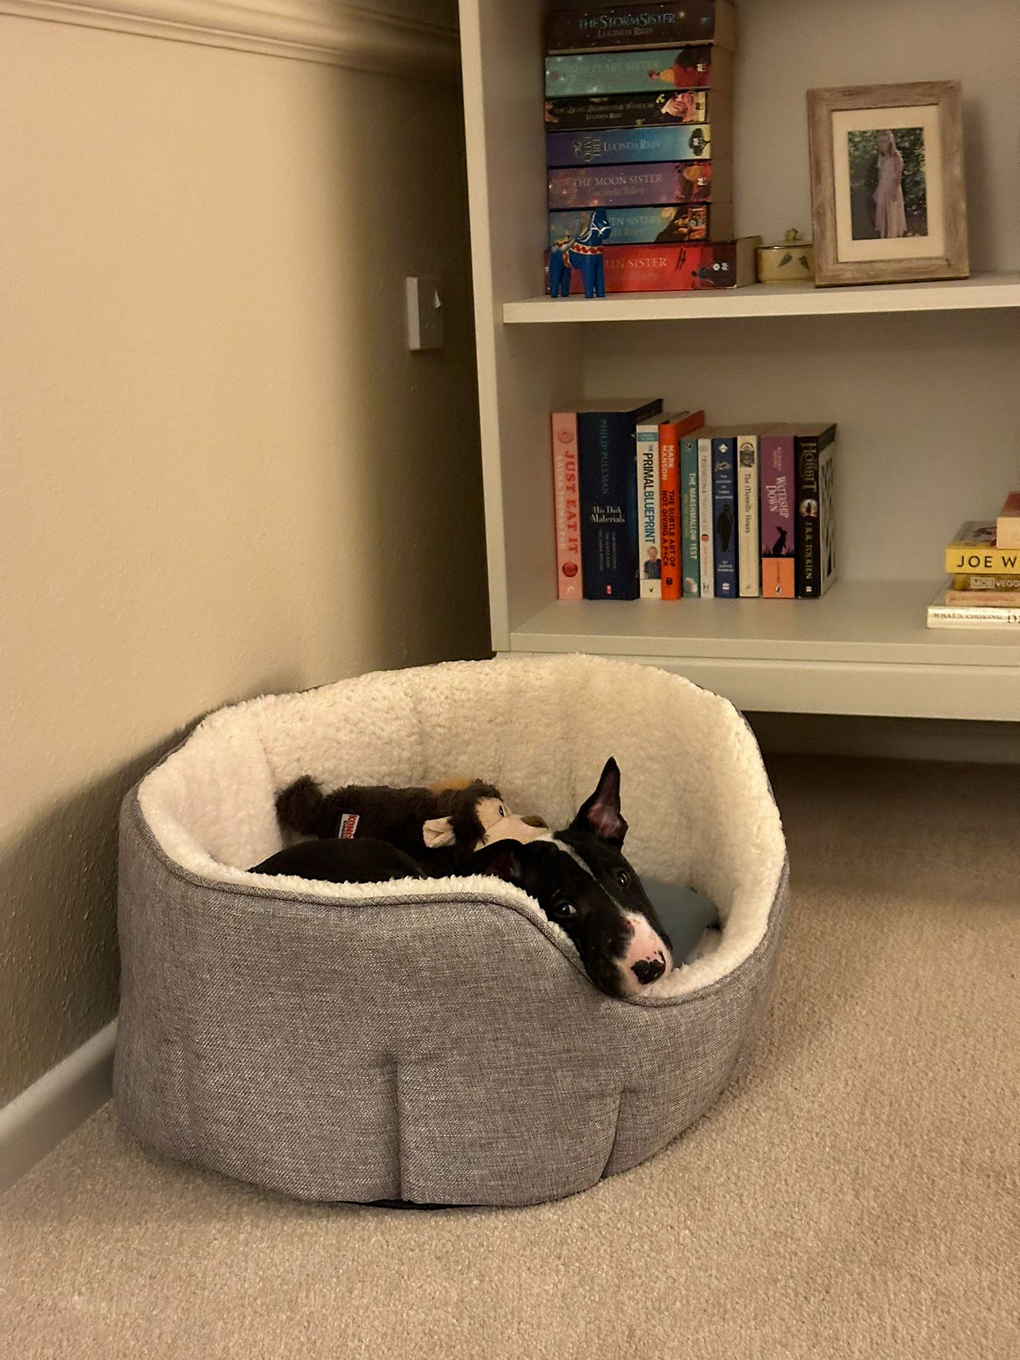 A black and white English bull terrier peaking out of a large gray dog bed, with a bookcase in the background